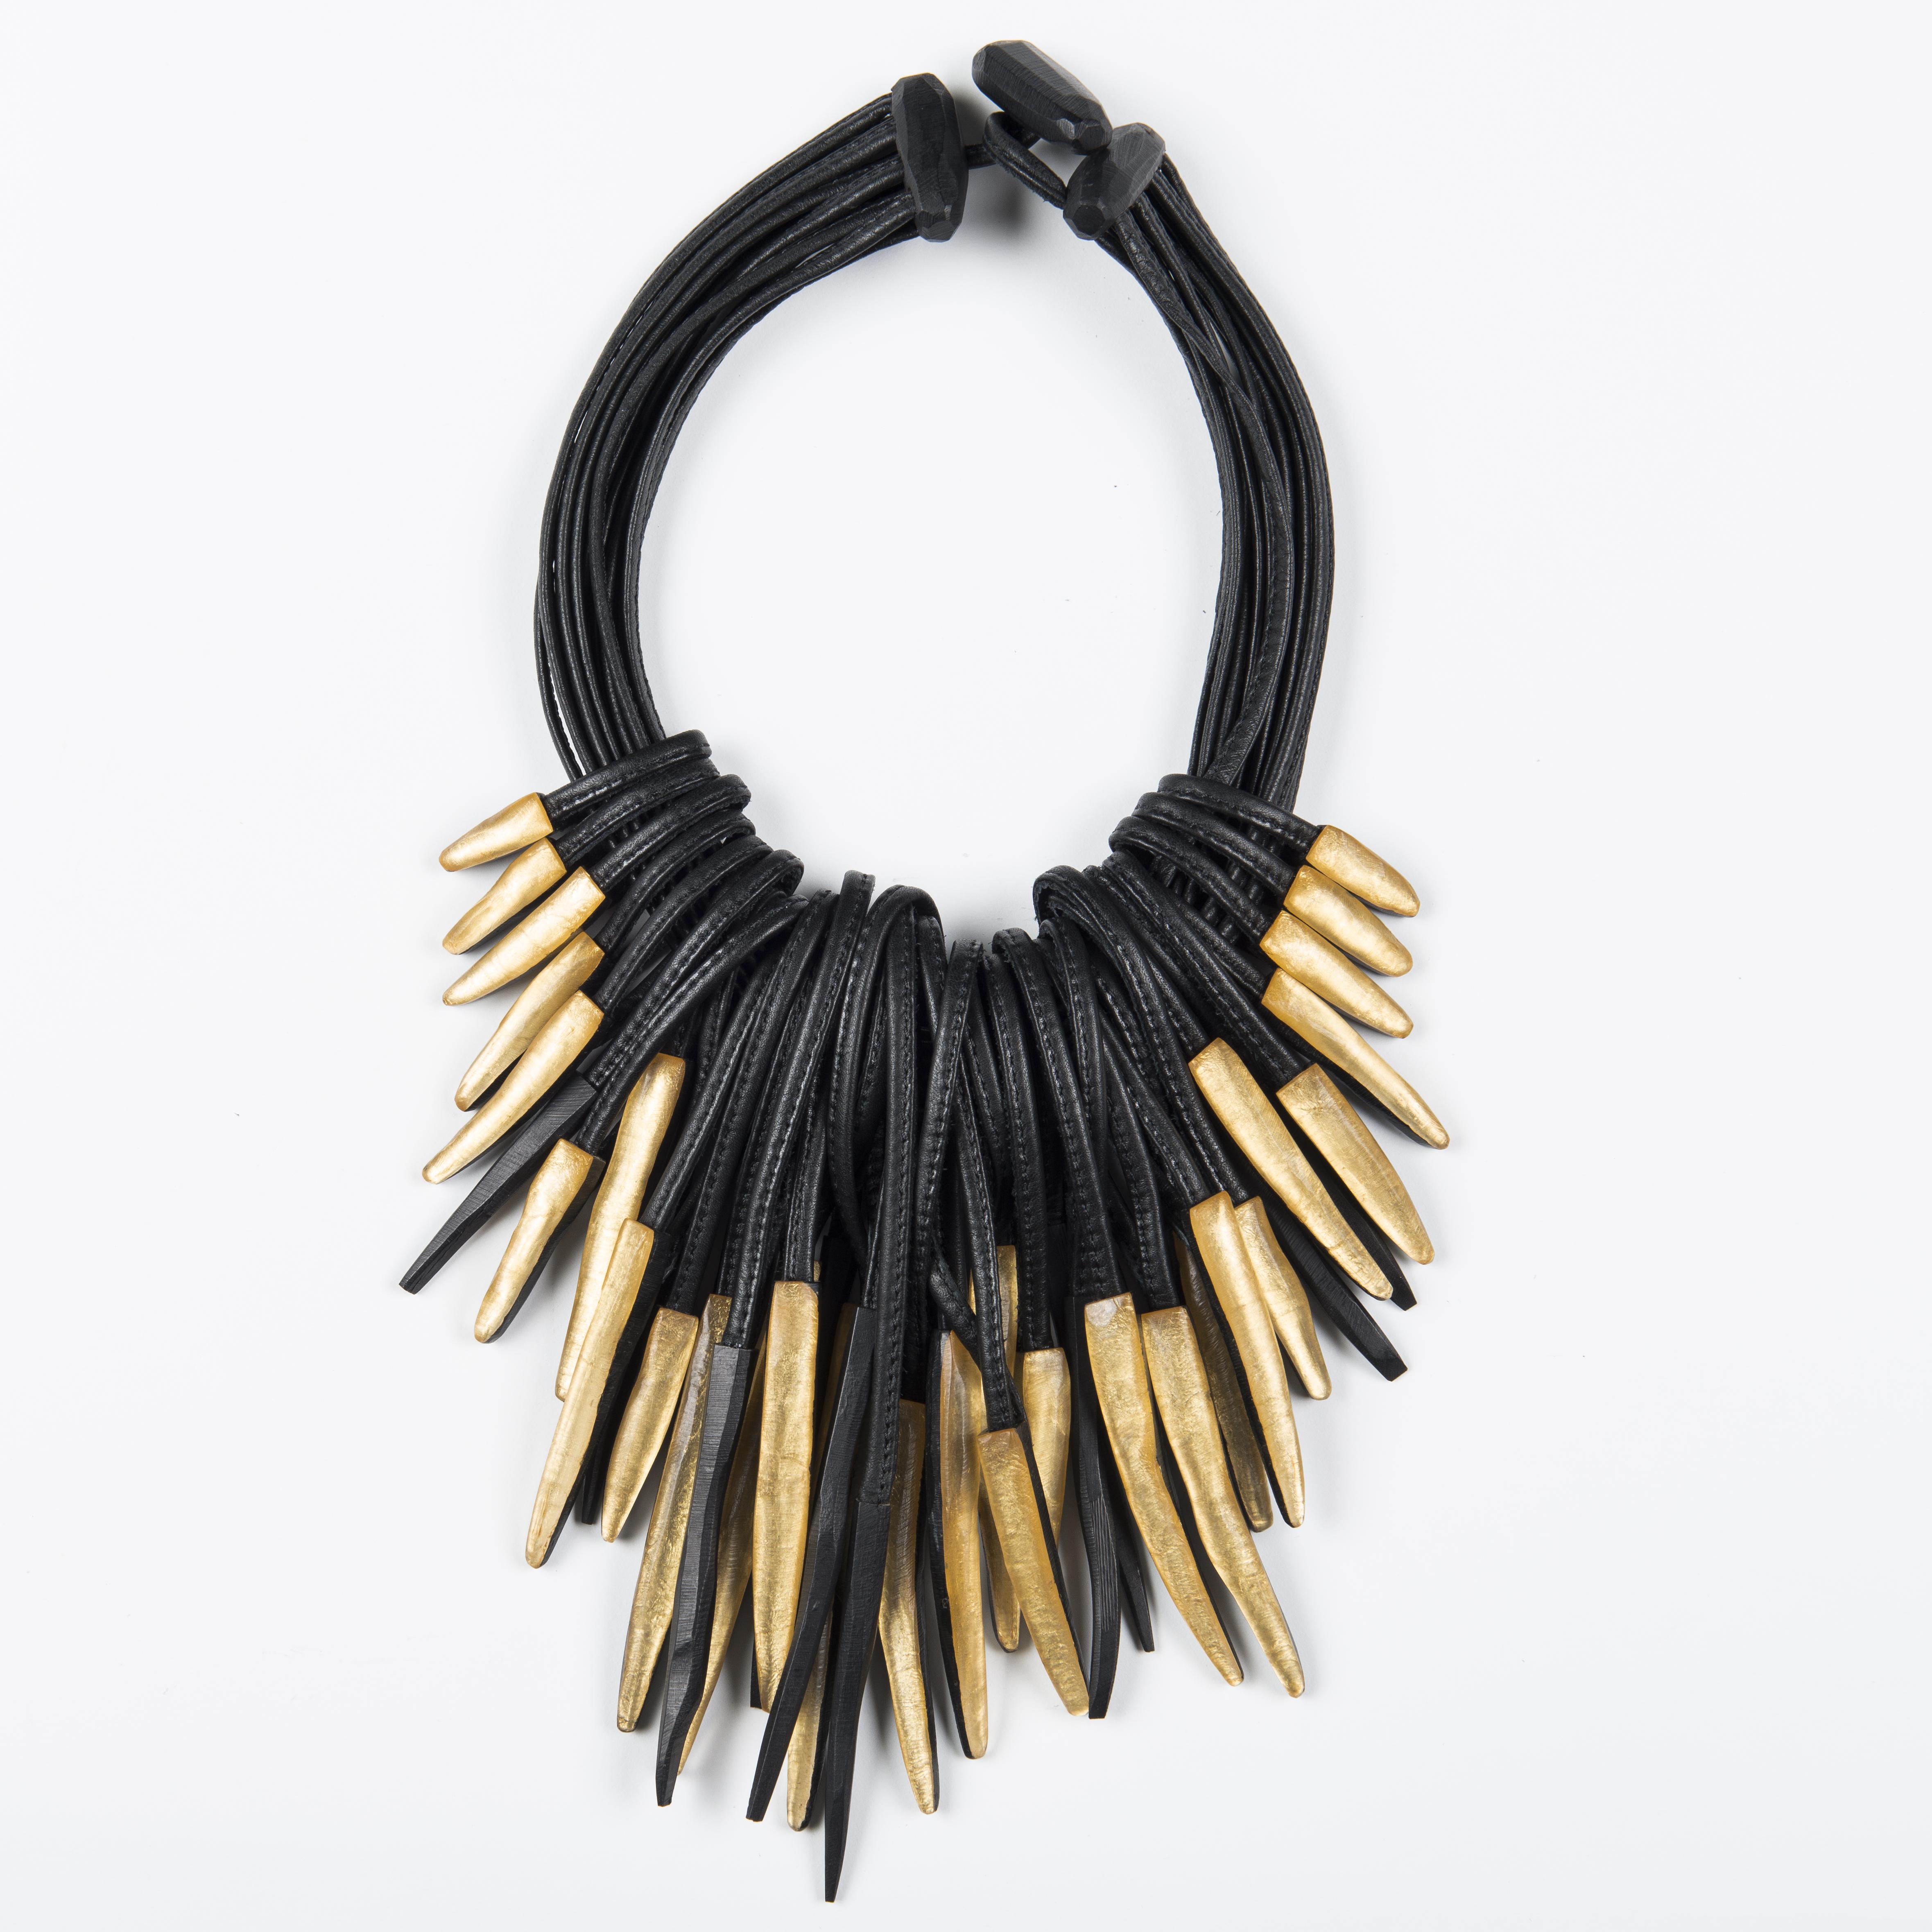 A necklace made from thick black leather cords features many gold dart-like pendants and fastens with a toggle at the top.